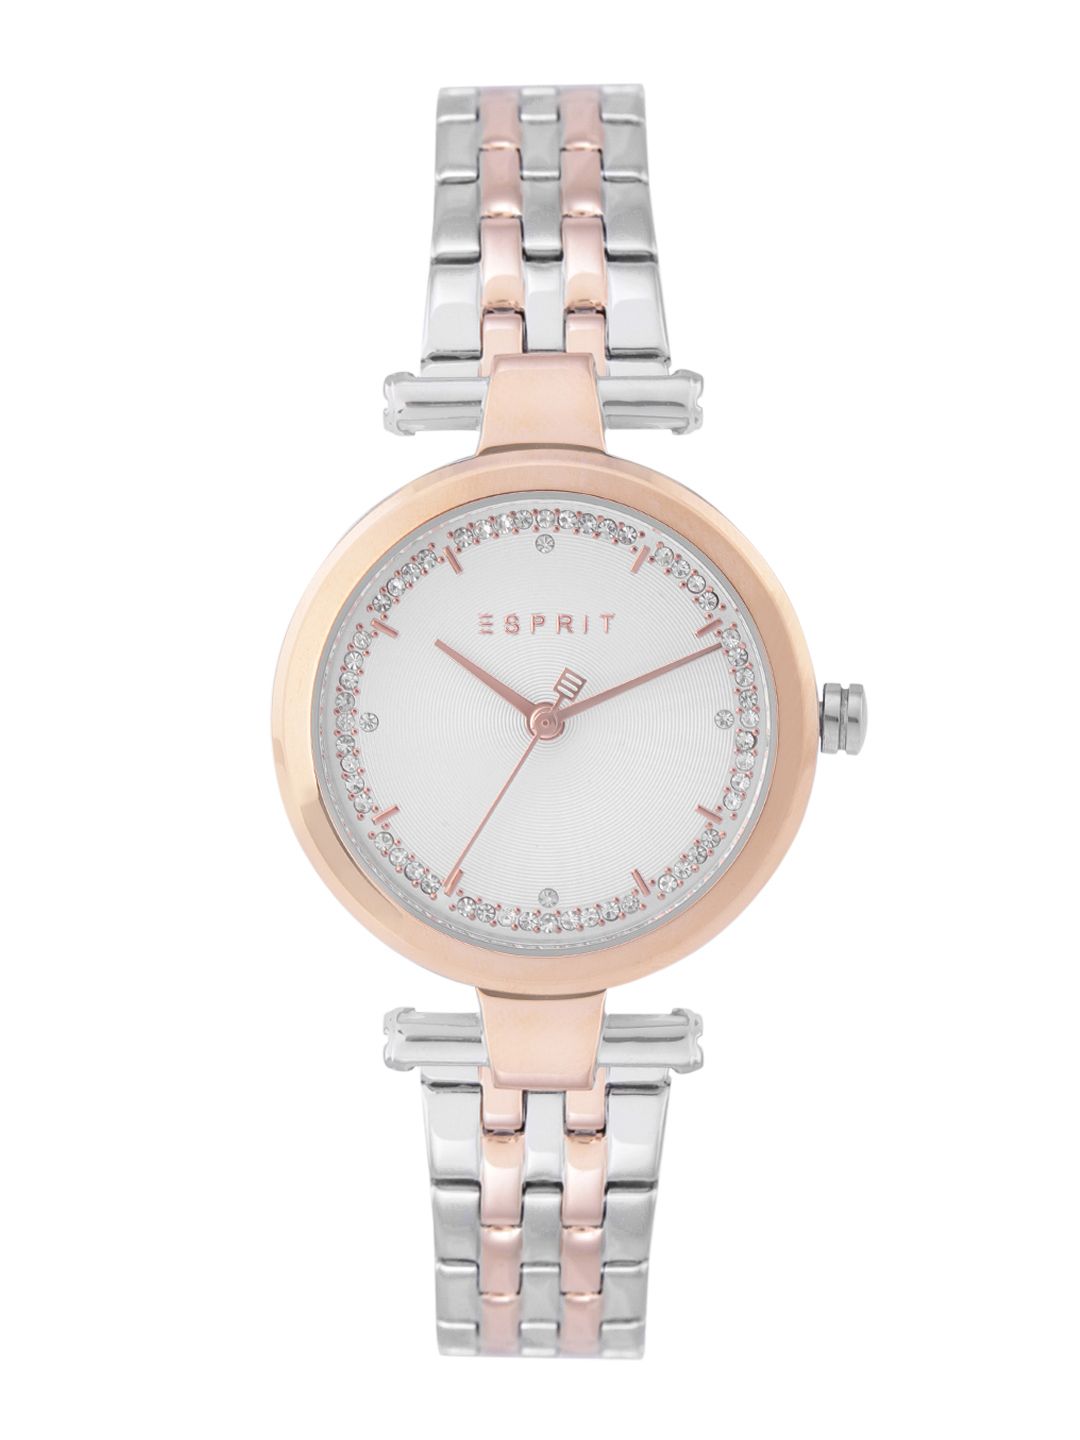 ESPRIT Women Silver-Toned Dial & Bracelet Style Straps Analogue Watch ES1L203M0105 Price in India